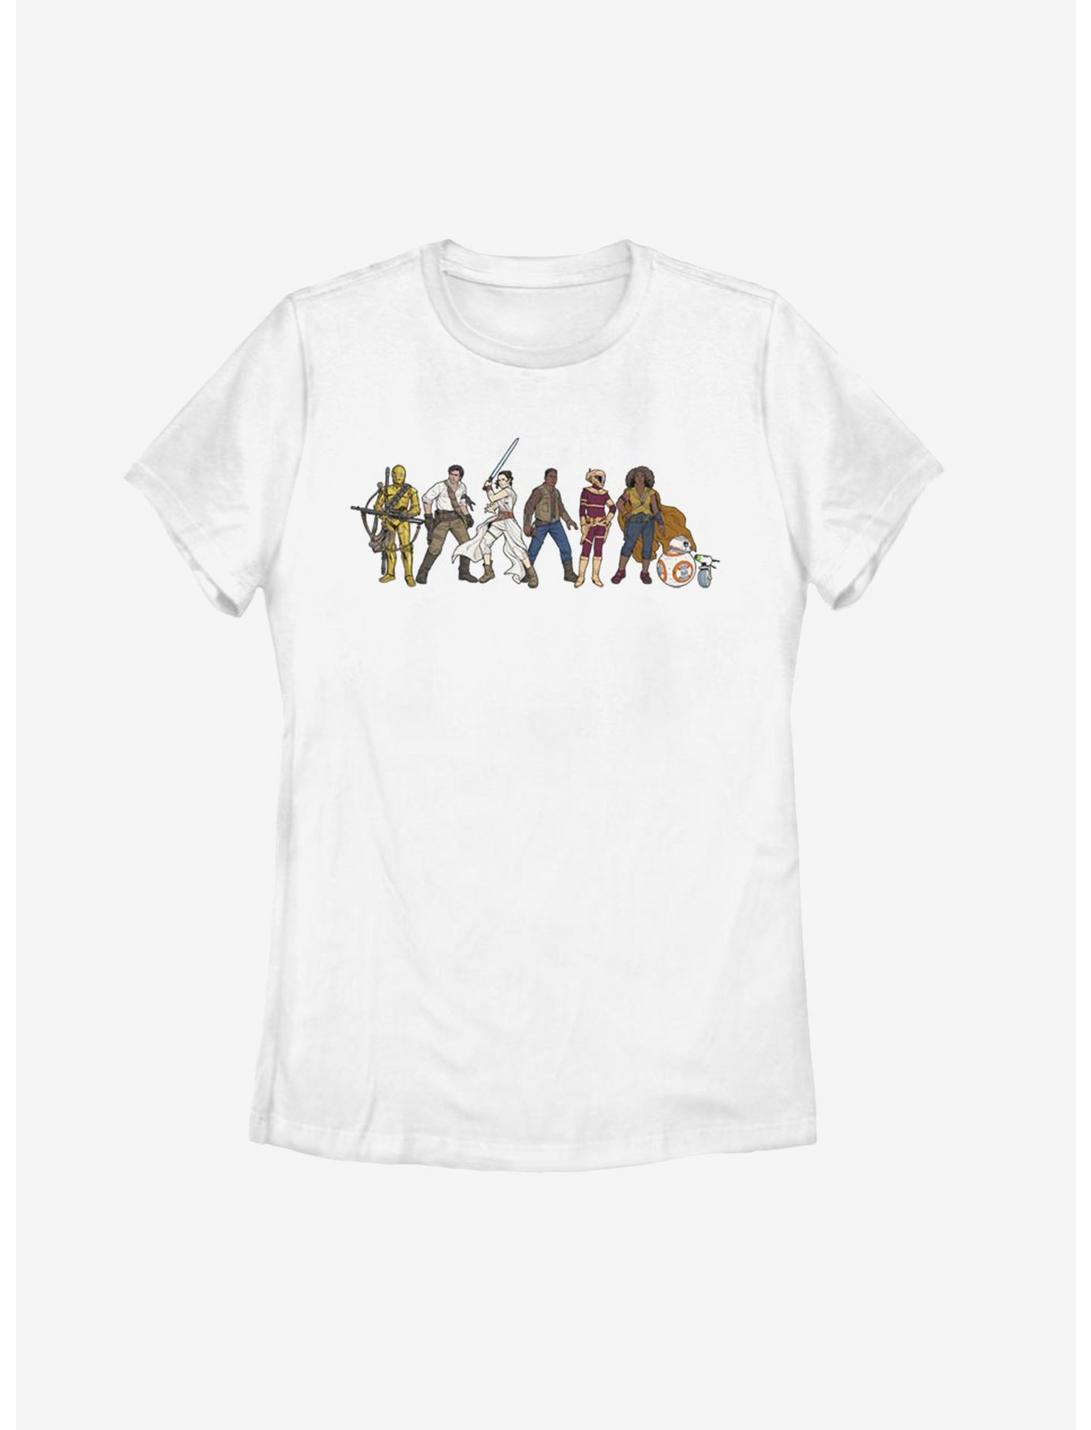 Star Wars Episode IX The Rise Of Skywalker Resistance Lineup Womens T-Shirt, WHITE, hi-res